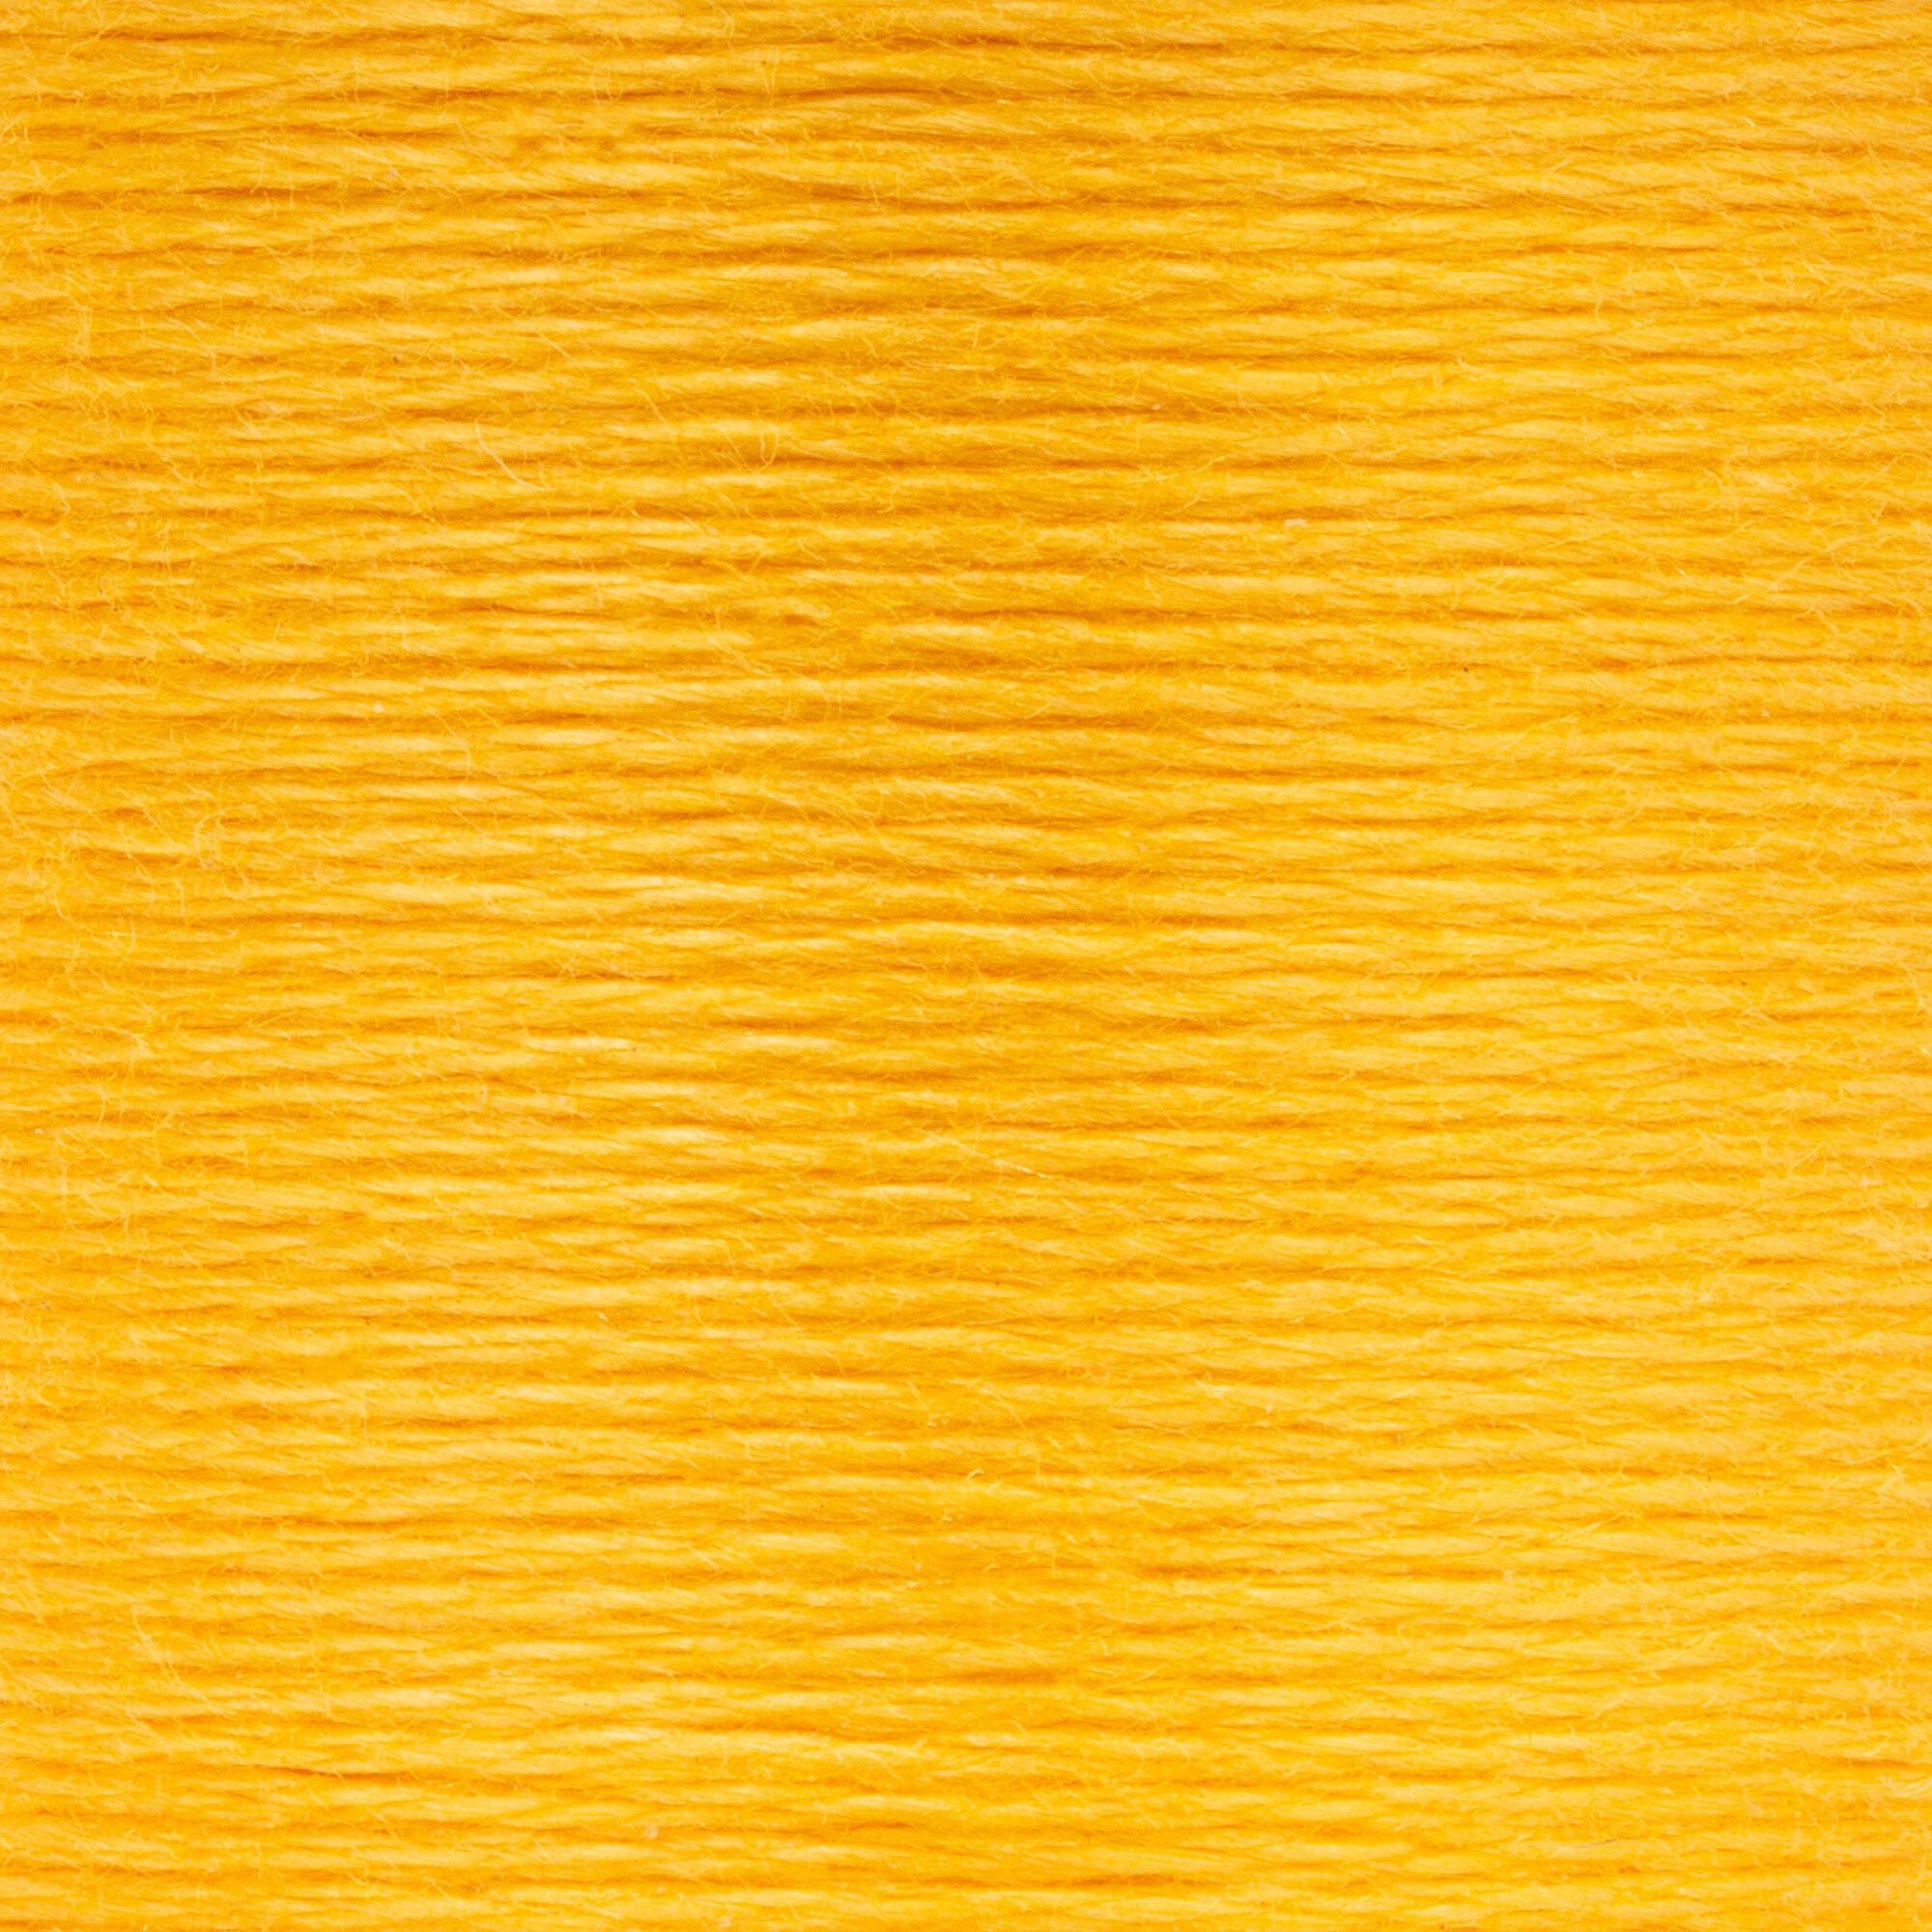 Anchor Embroidery Floss in Citrus Med Lt